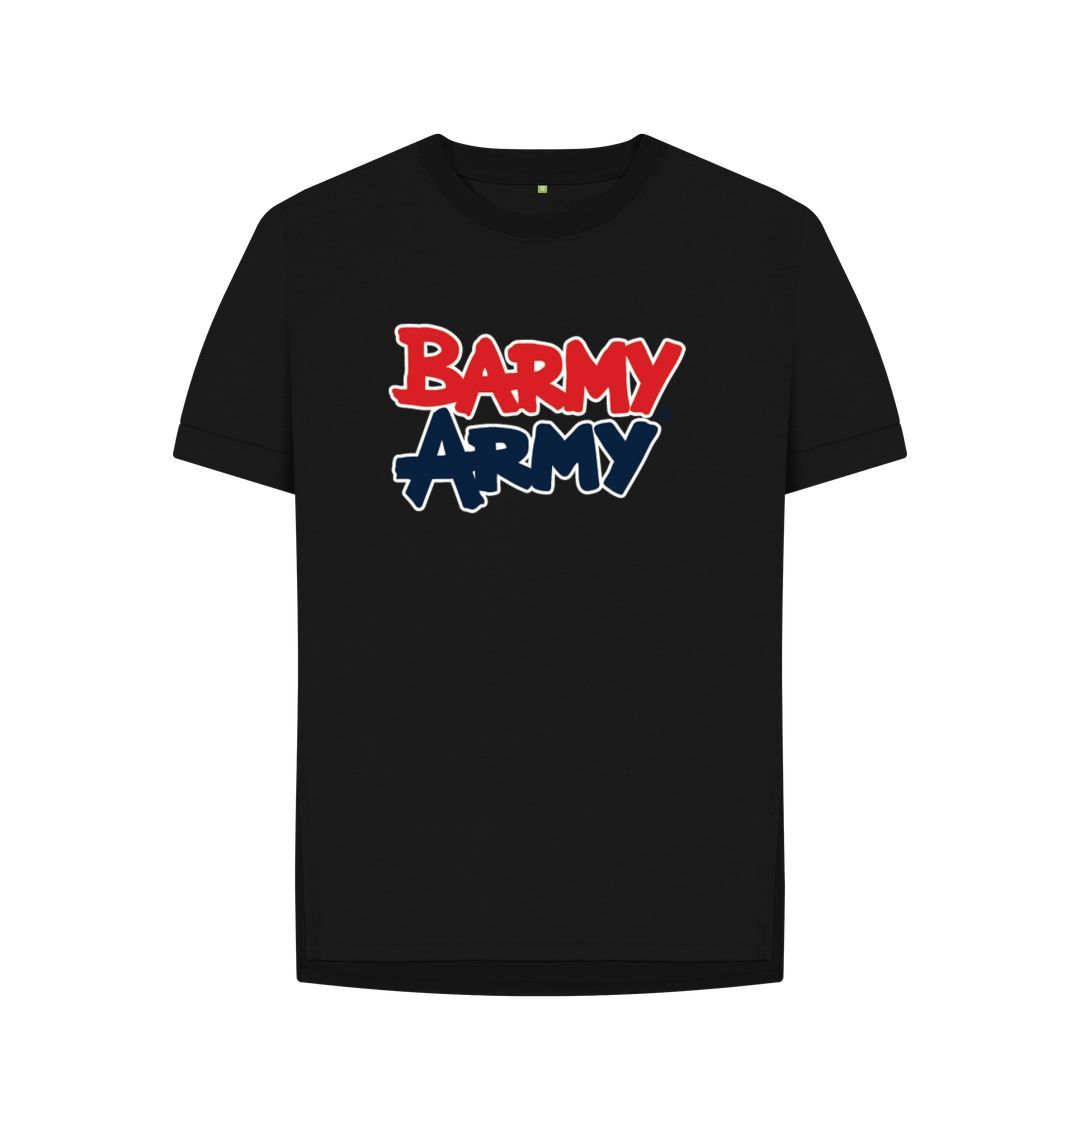 Black Barmy Army Large Print Relaxed Fit Ladies Tee